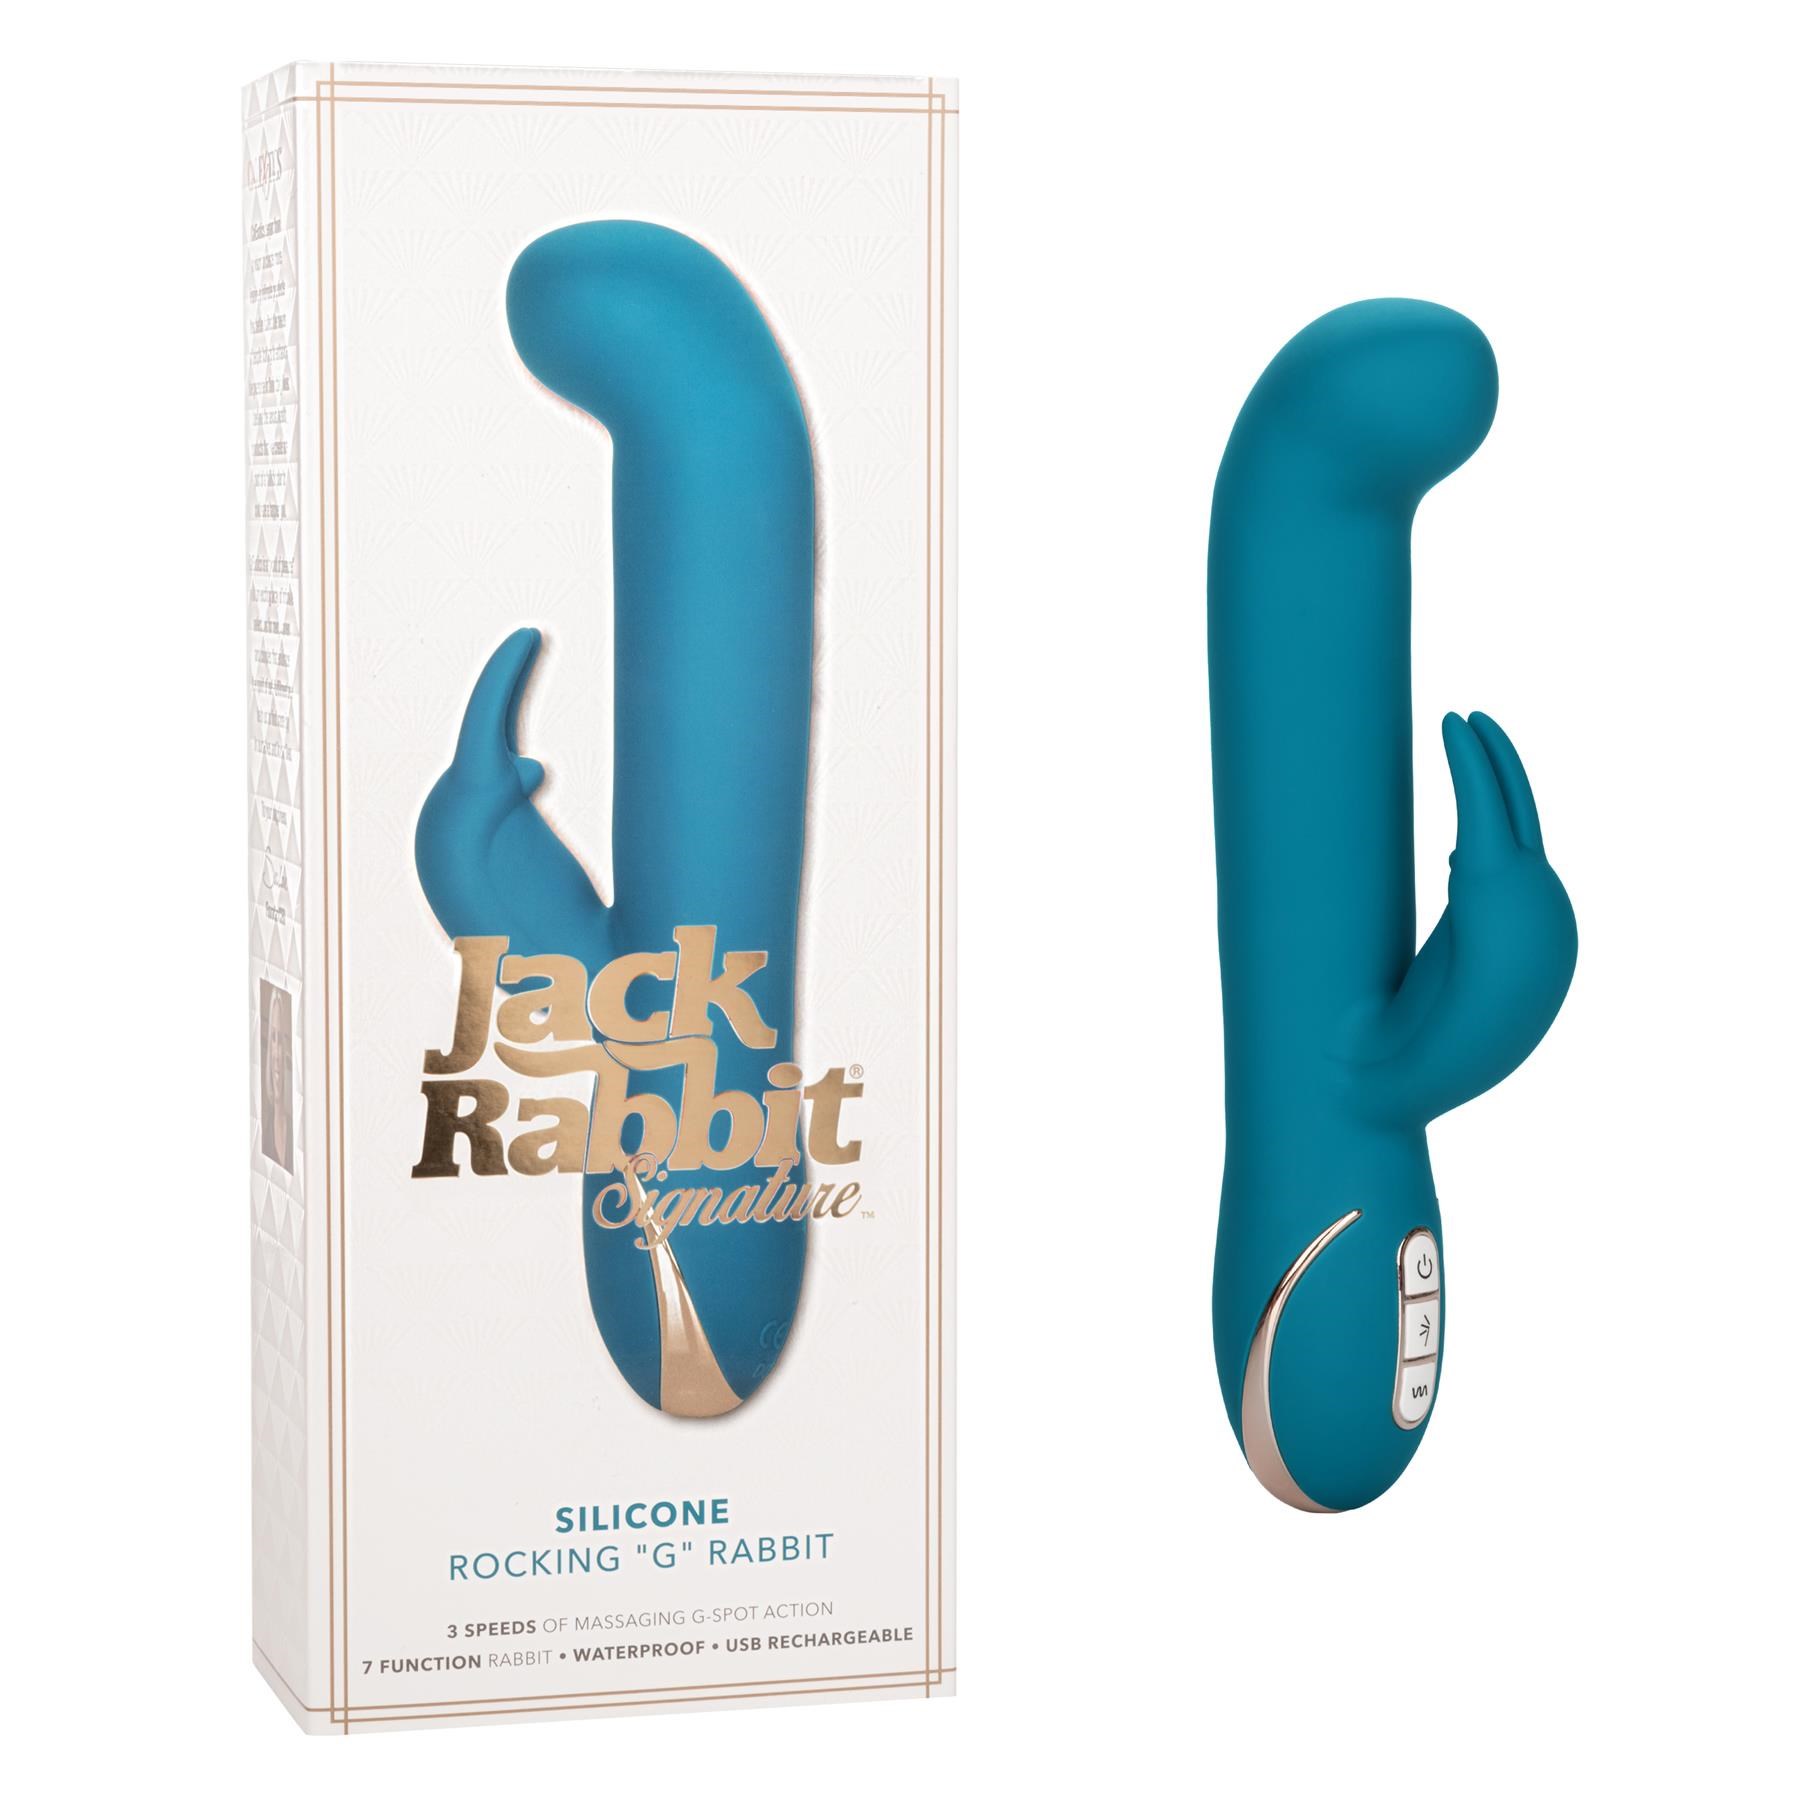 Jack Rabbit Signature Rocking G Rabbit - Product and Packaging